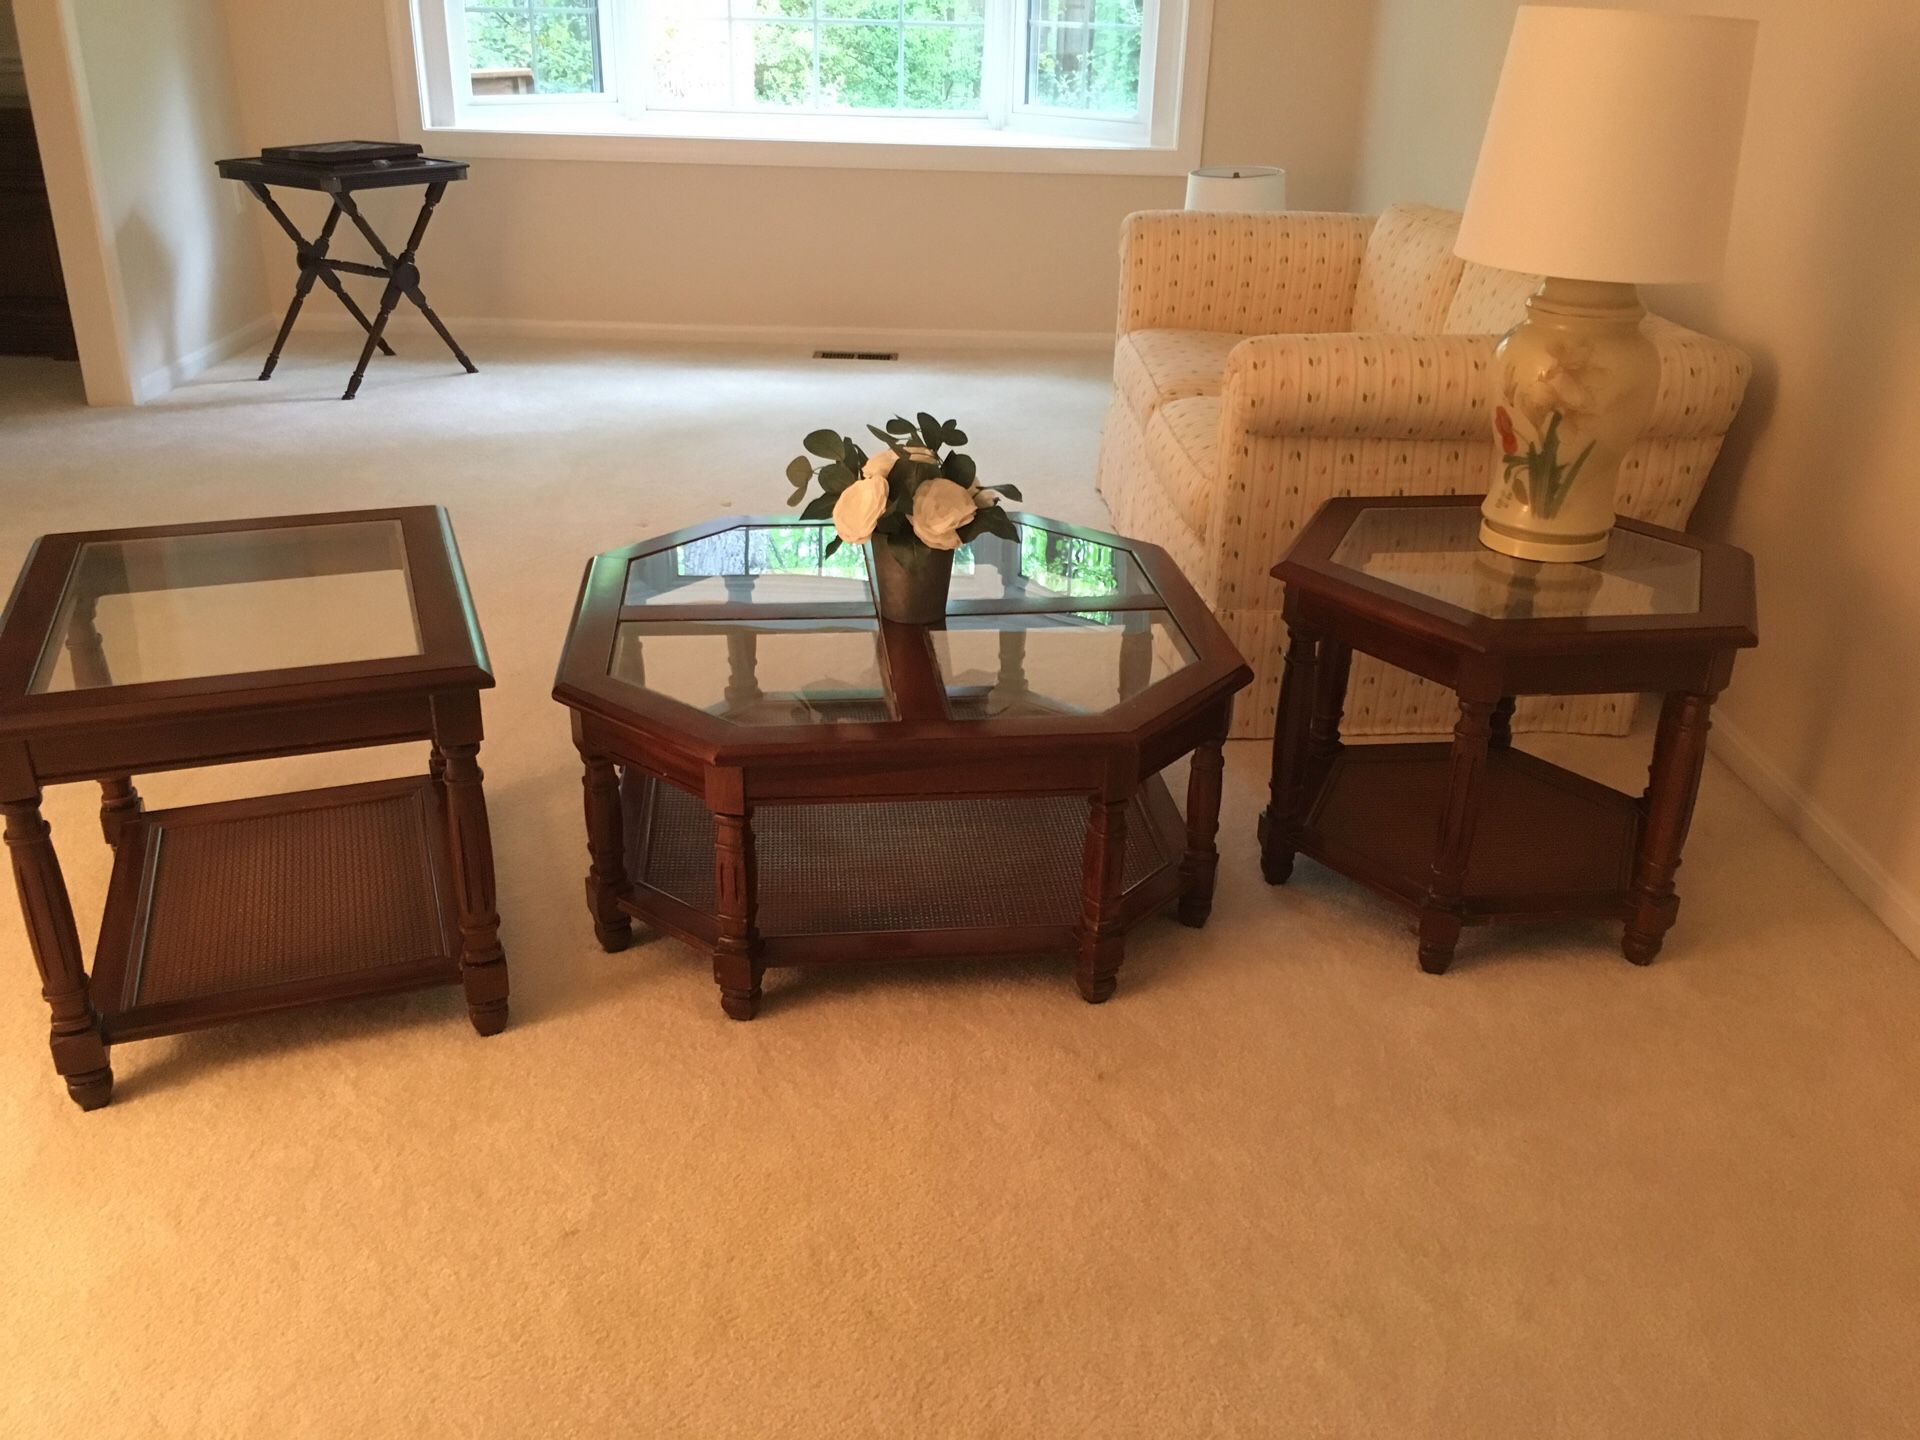 Matching end tables and cocktail table